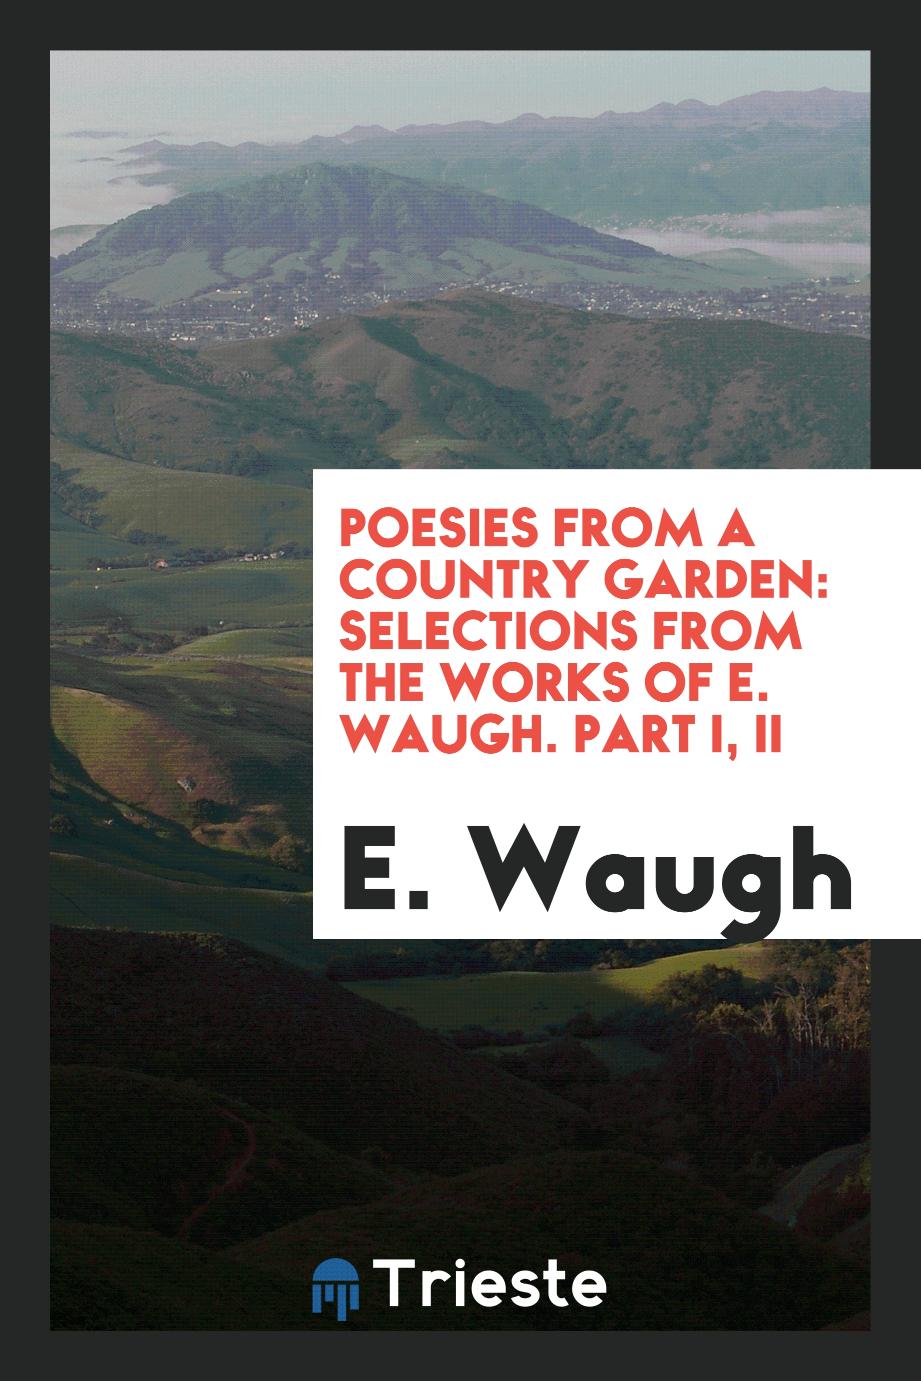 Poesies from a Country Garden: Selections from the Works of E. Waugh. Part I, II